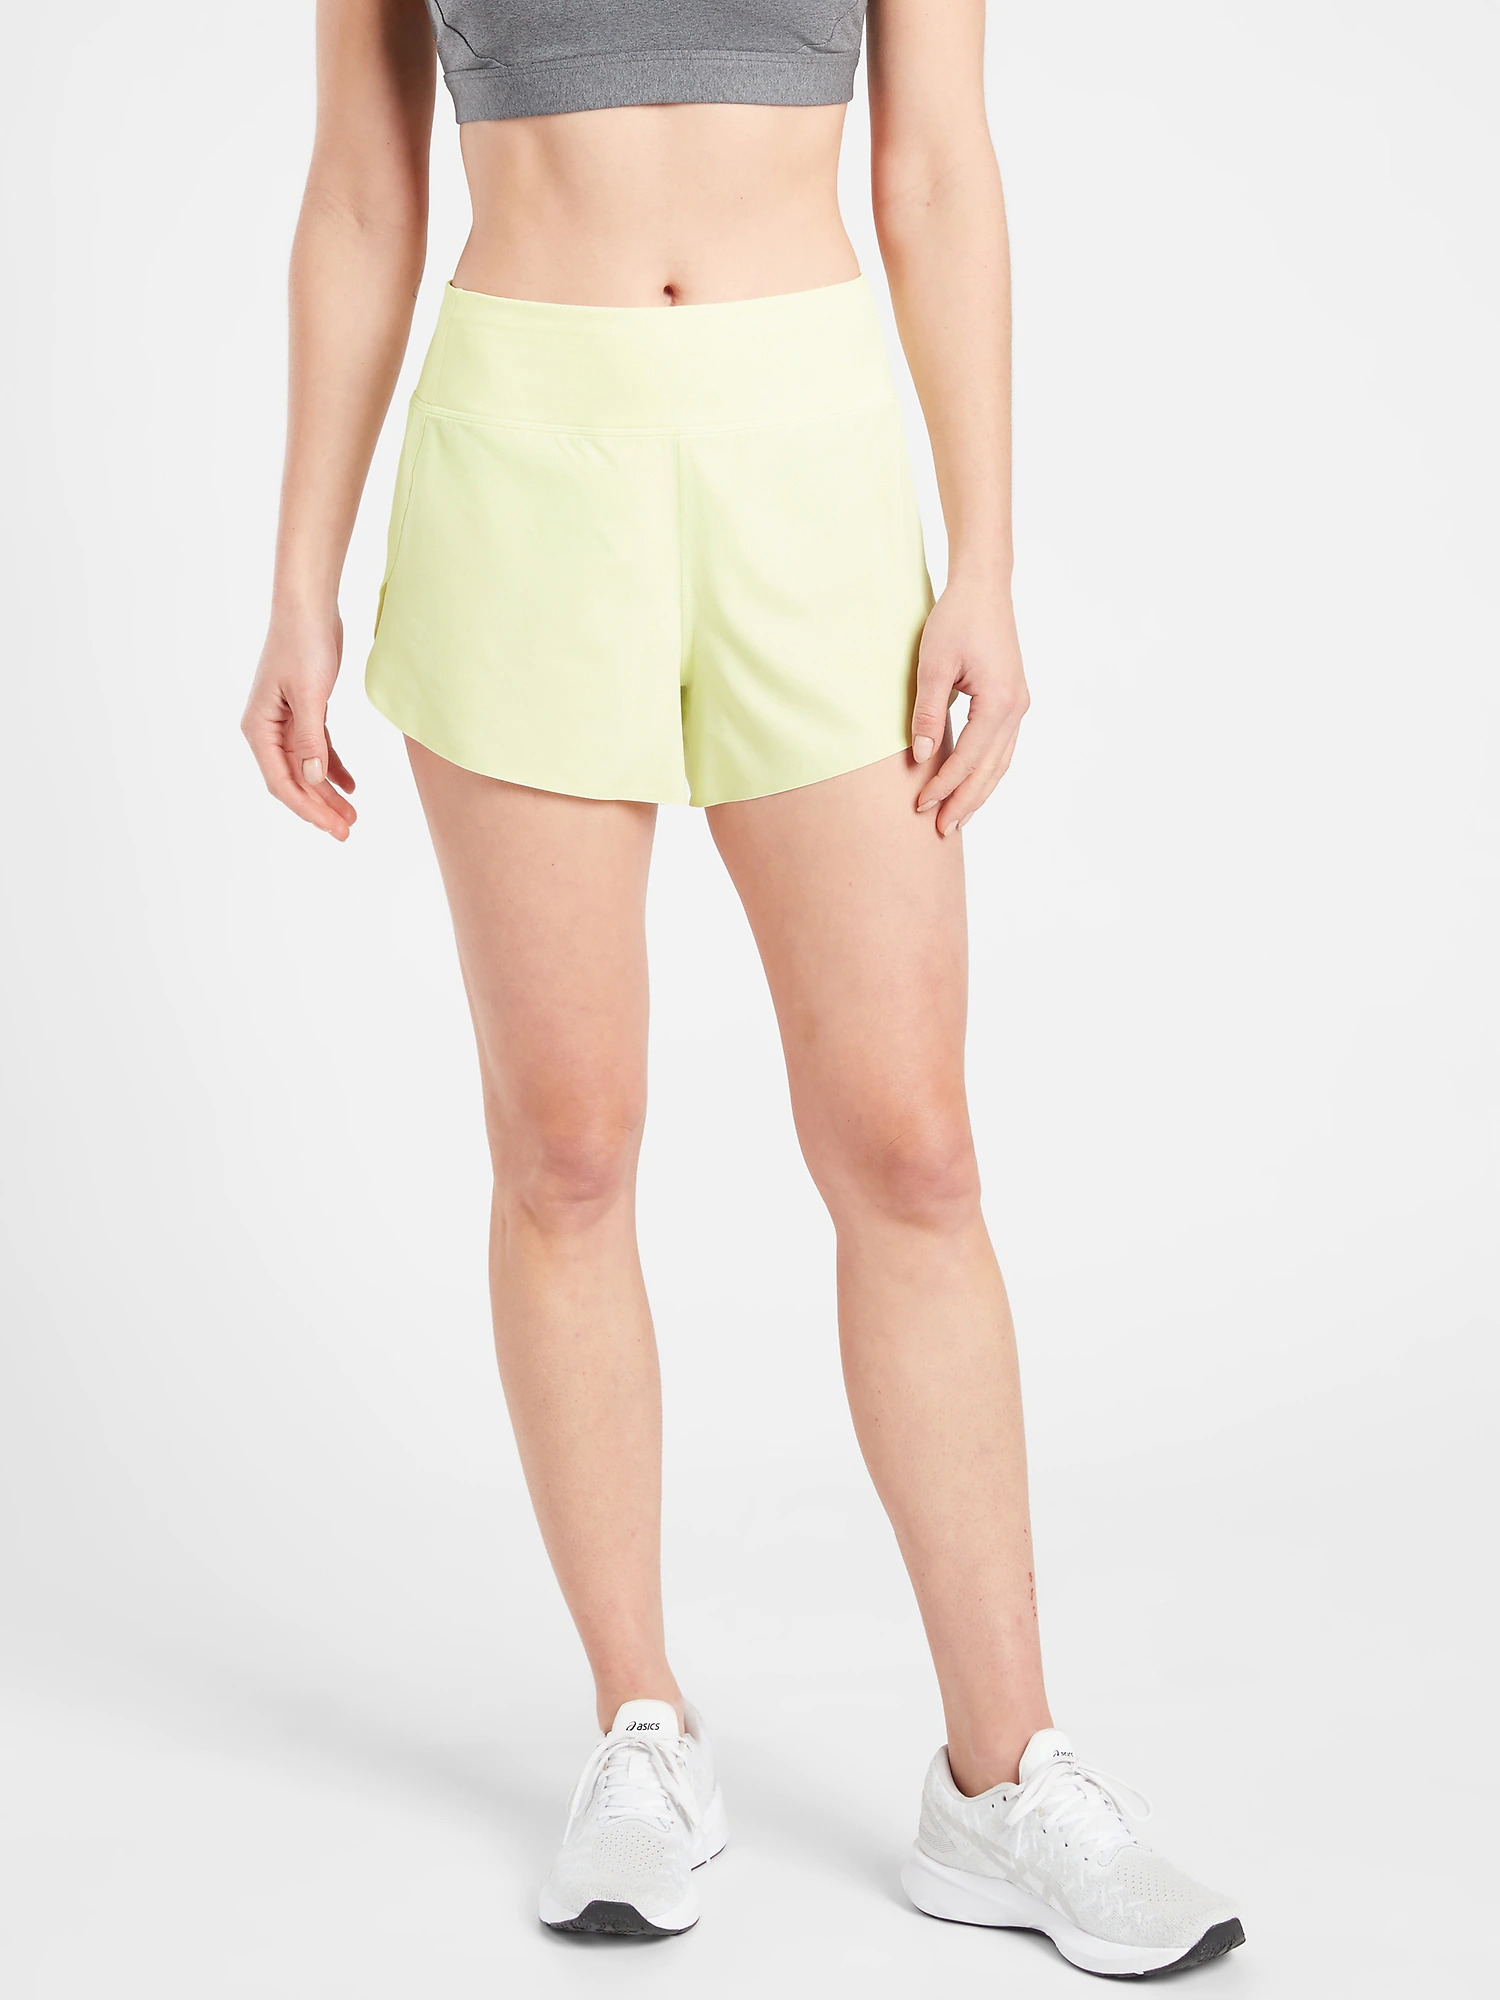 Athleta: 20% Off Sitewide + Free Shipping on Orders $50+